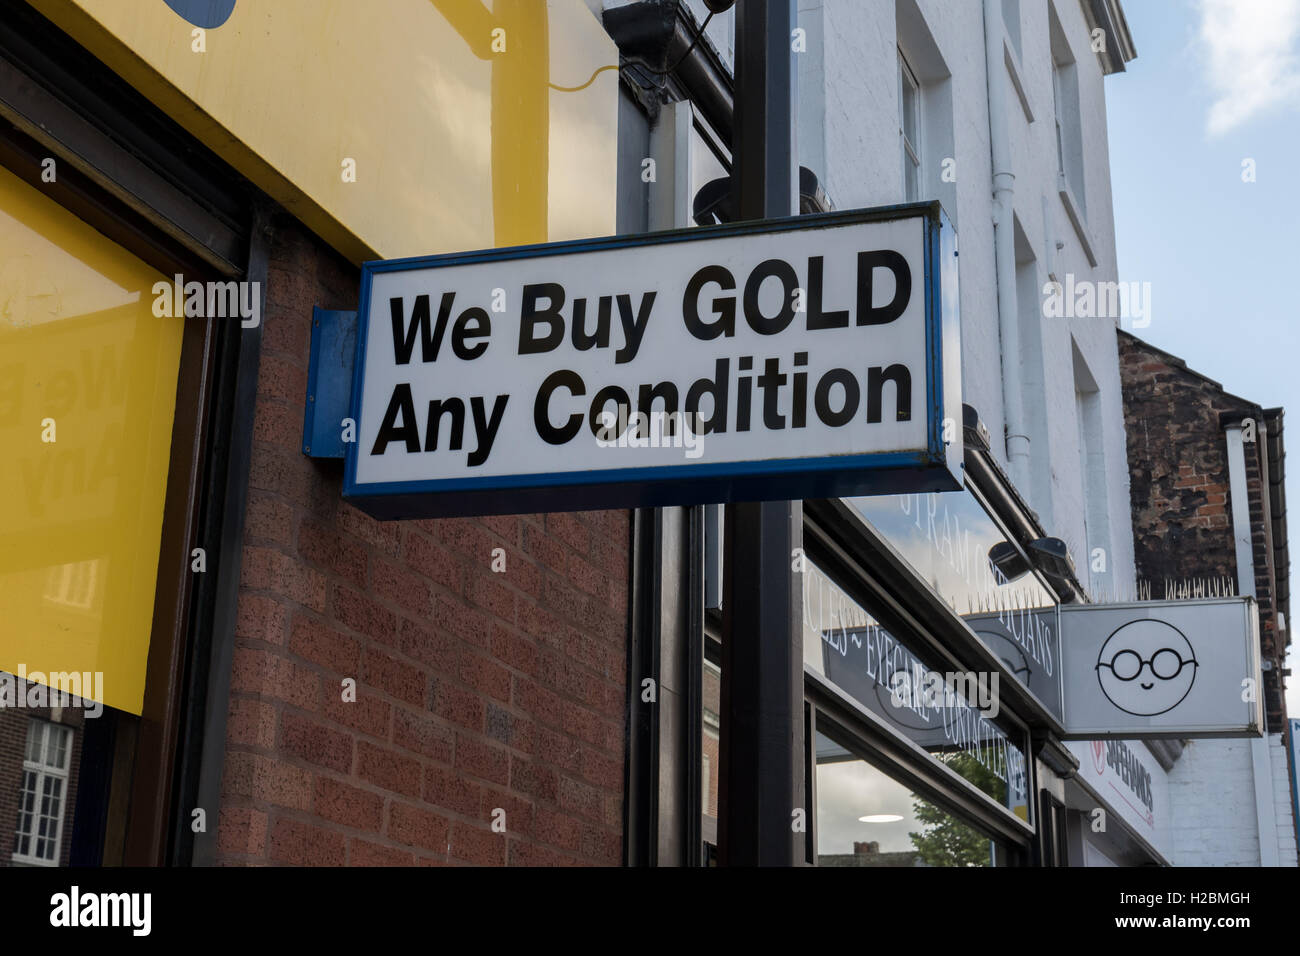 We Buy Gold Any Condition sign Stock Photo